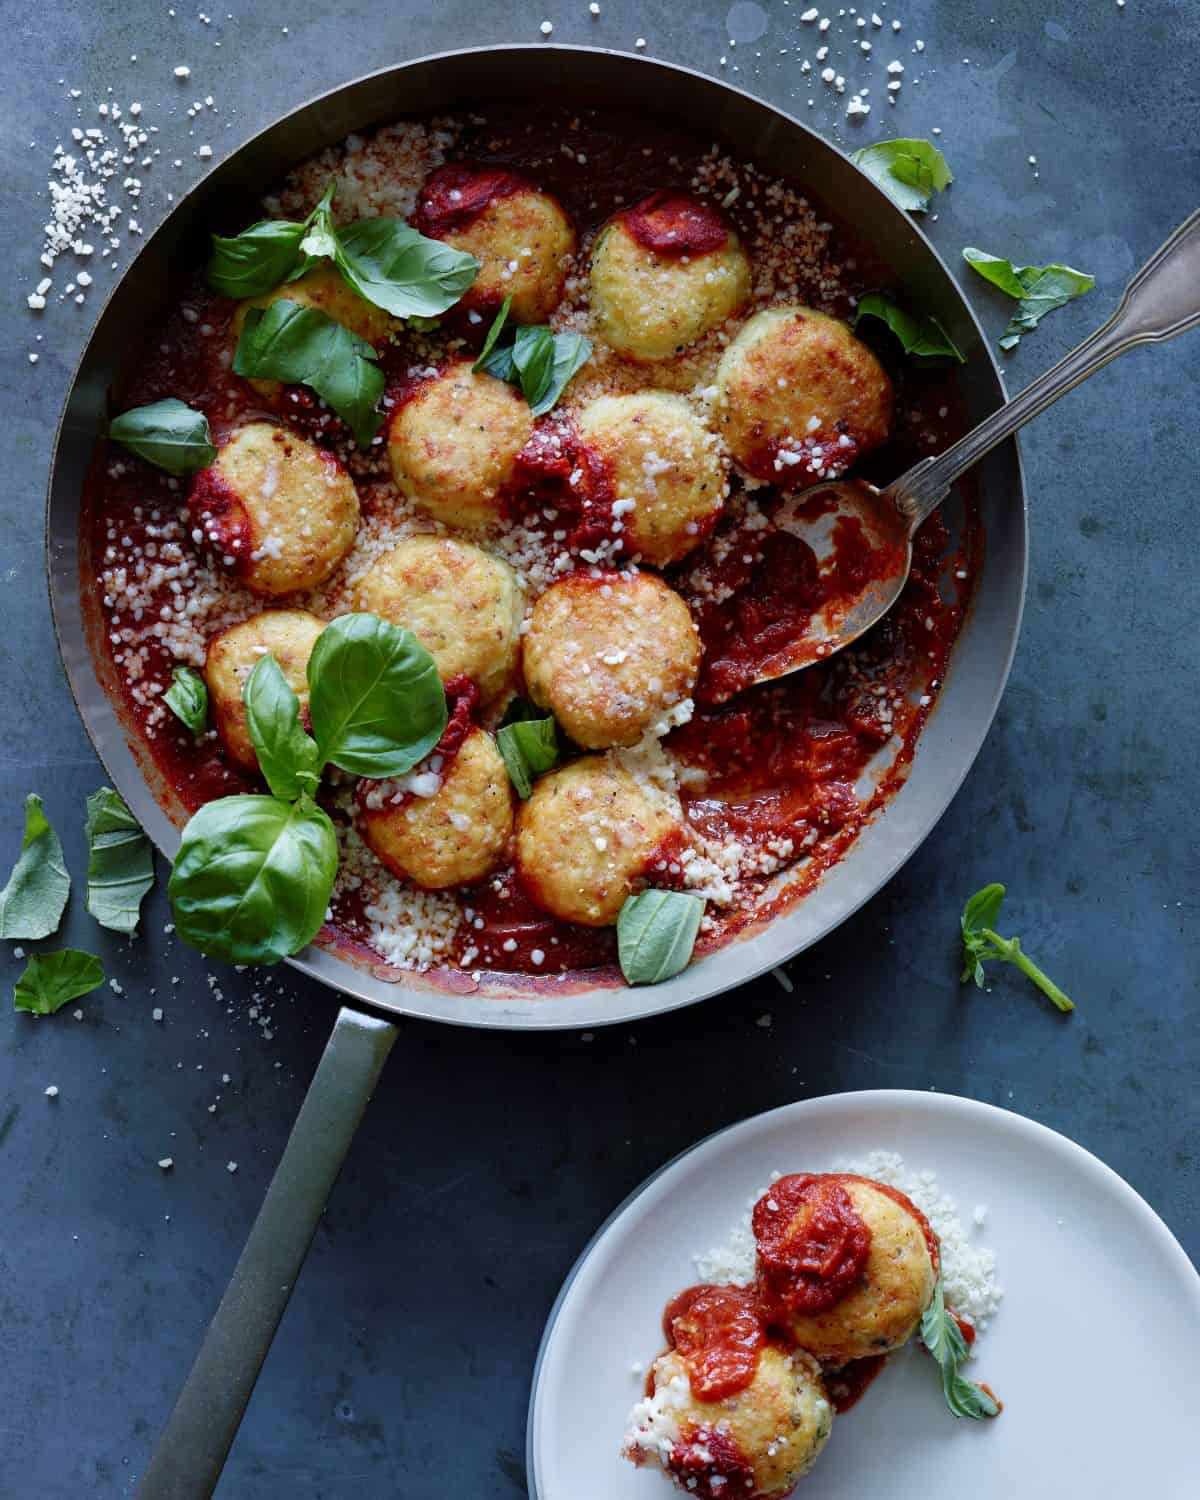 A skillet with chicken parm meatballs garnished with basil leaves and a serving spoon in the skillet, with a small plate with the meatballs in it on the side.